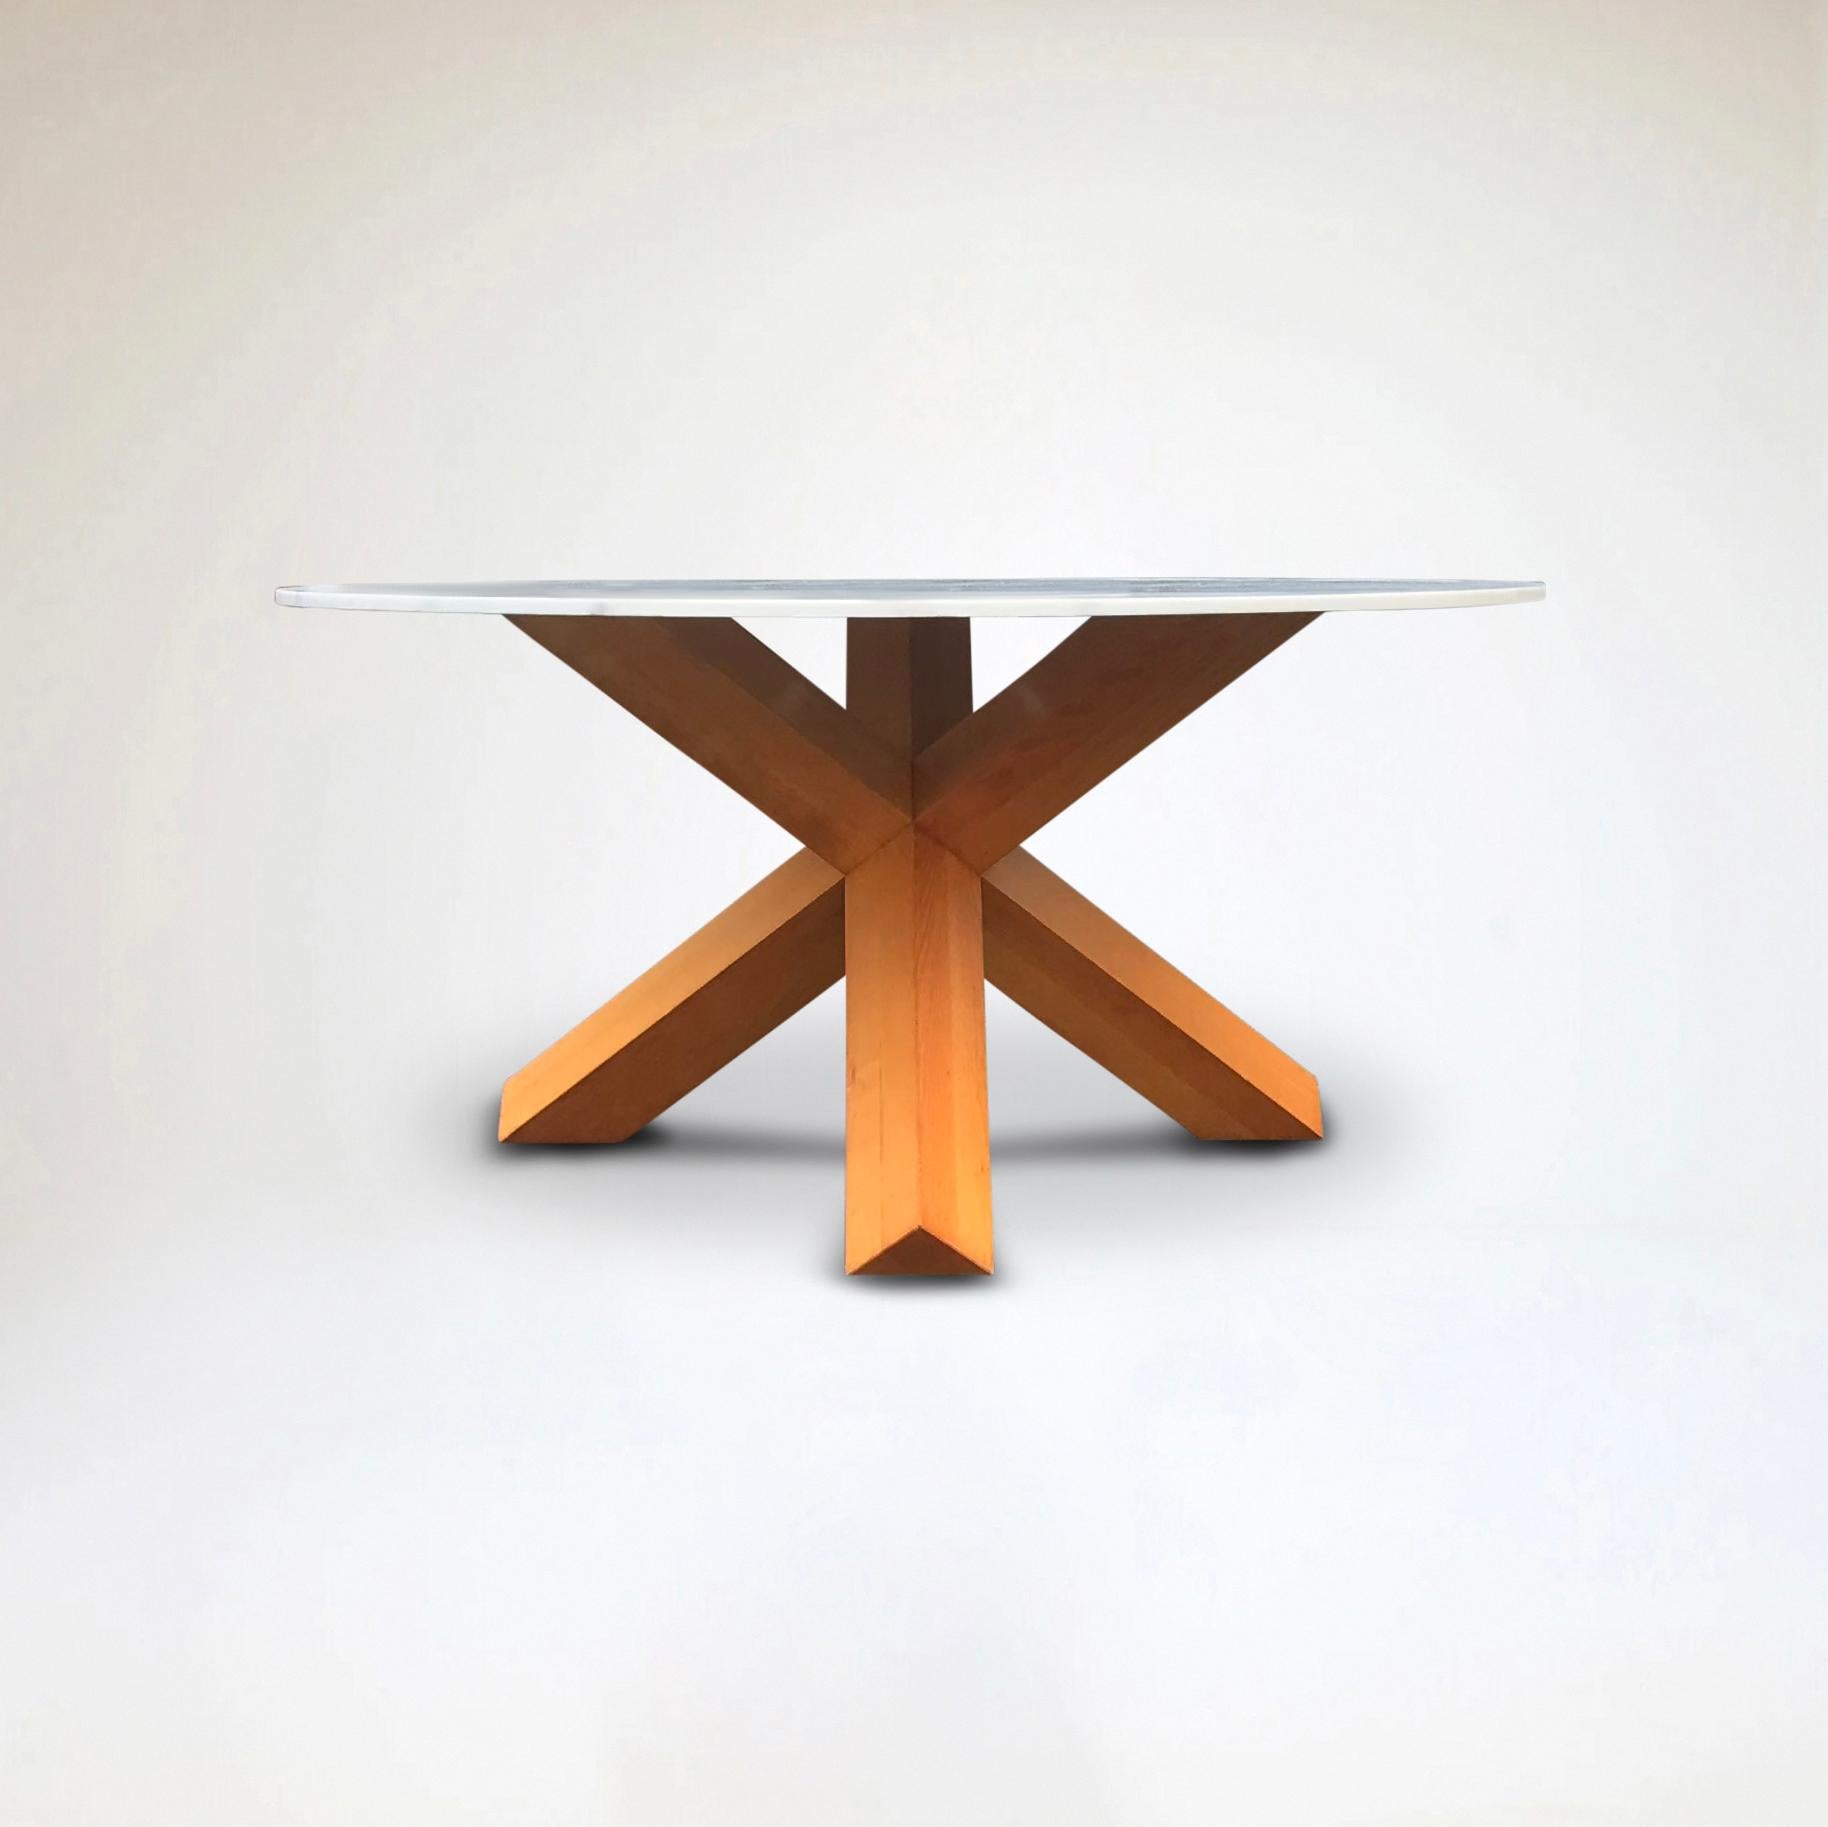 The La Rotonda table designed by Mario Bellini in 1976 has a simple sculpted base, a diag­o­nal inter­sec­tion of three legs with a square cross-section, which supports a 165 cm round table top, bound together by strong joints carved directly from